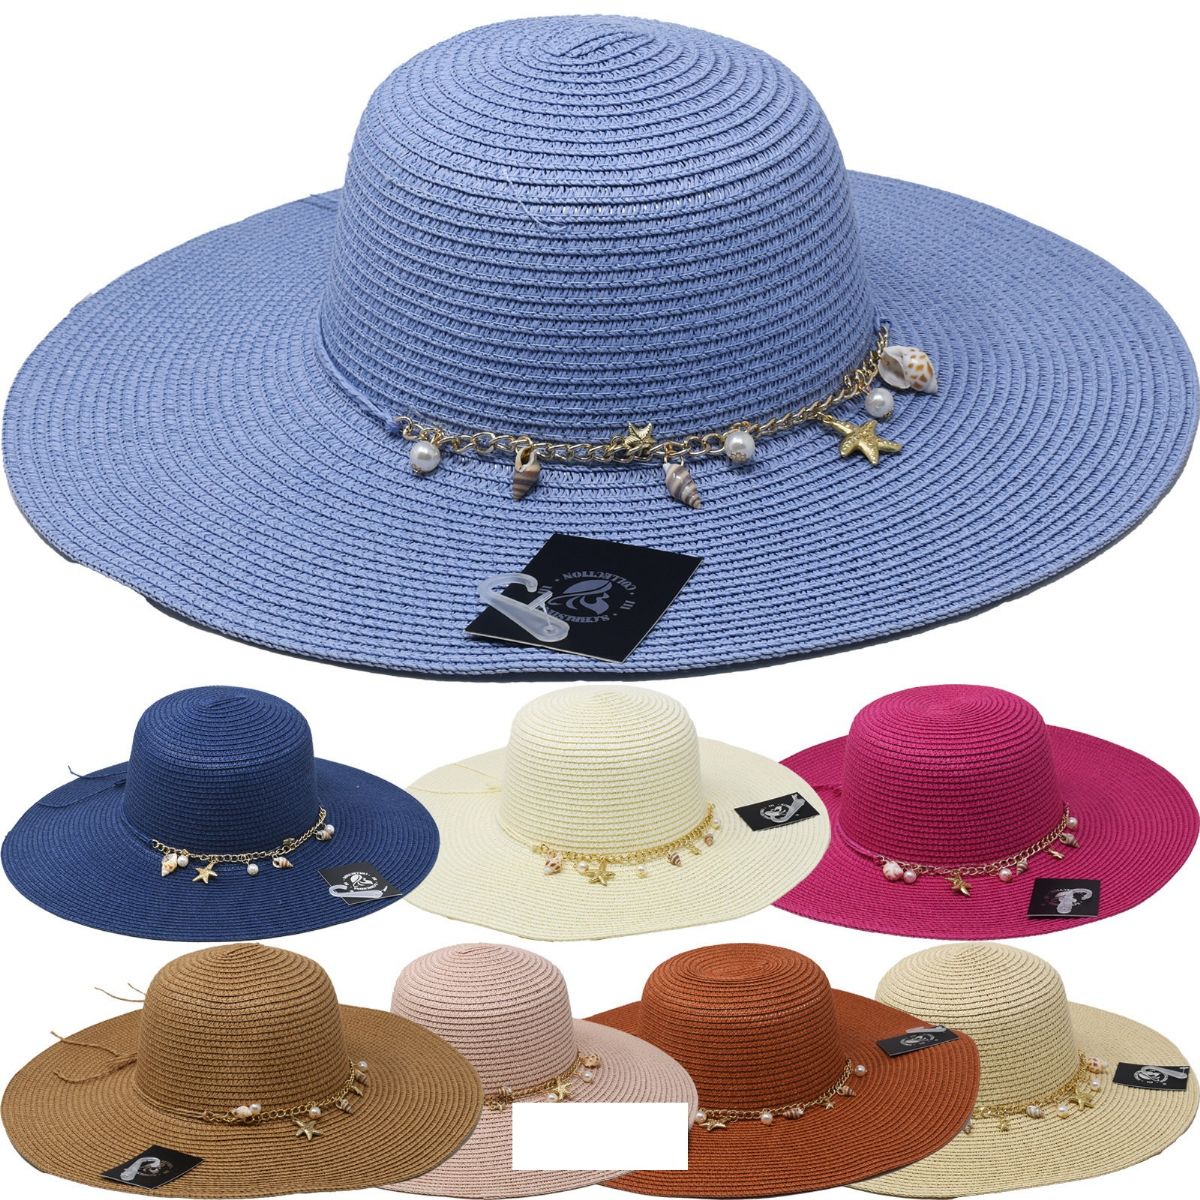 12 Pieces of Beach Hat With Sea Shell Band Wide